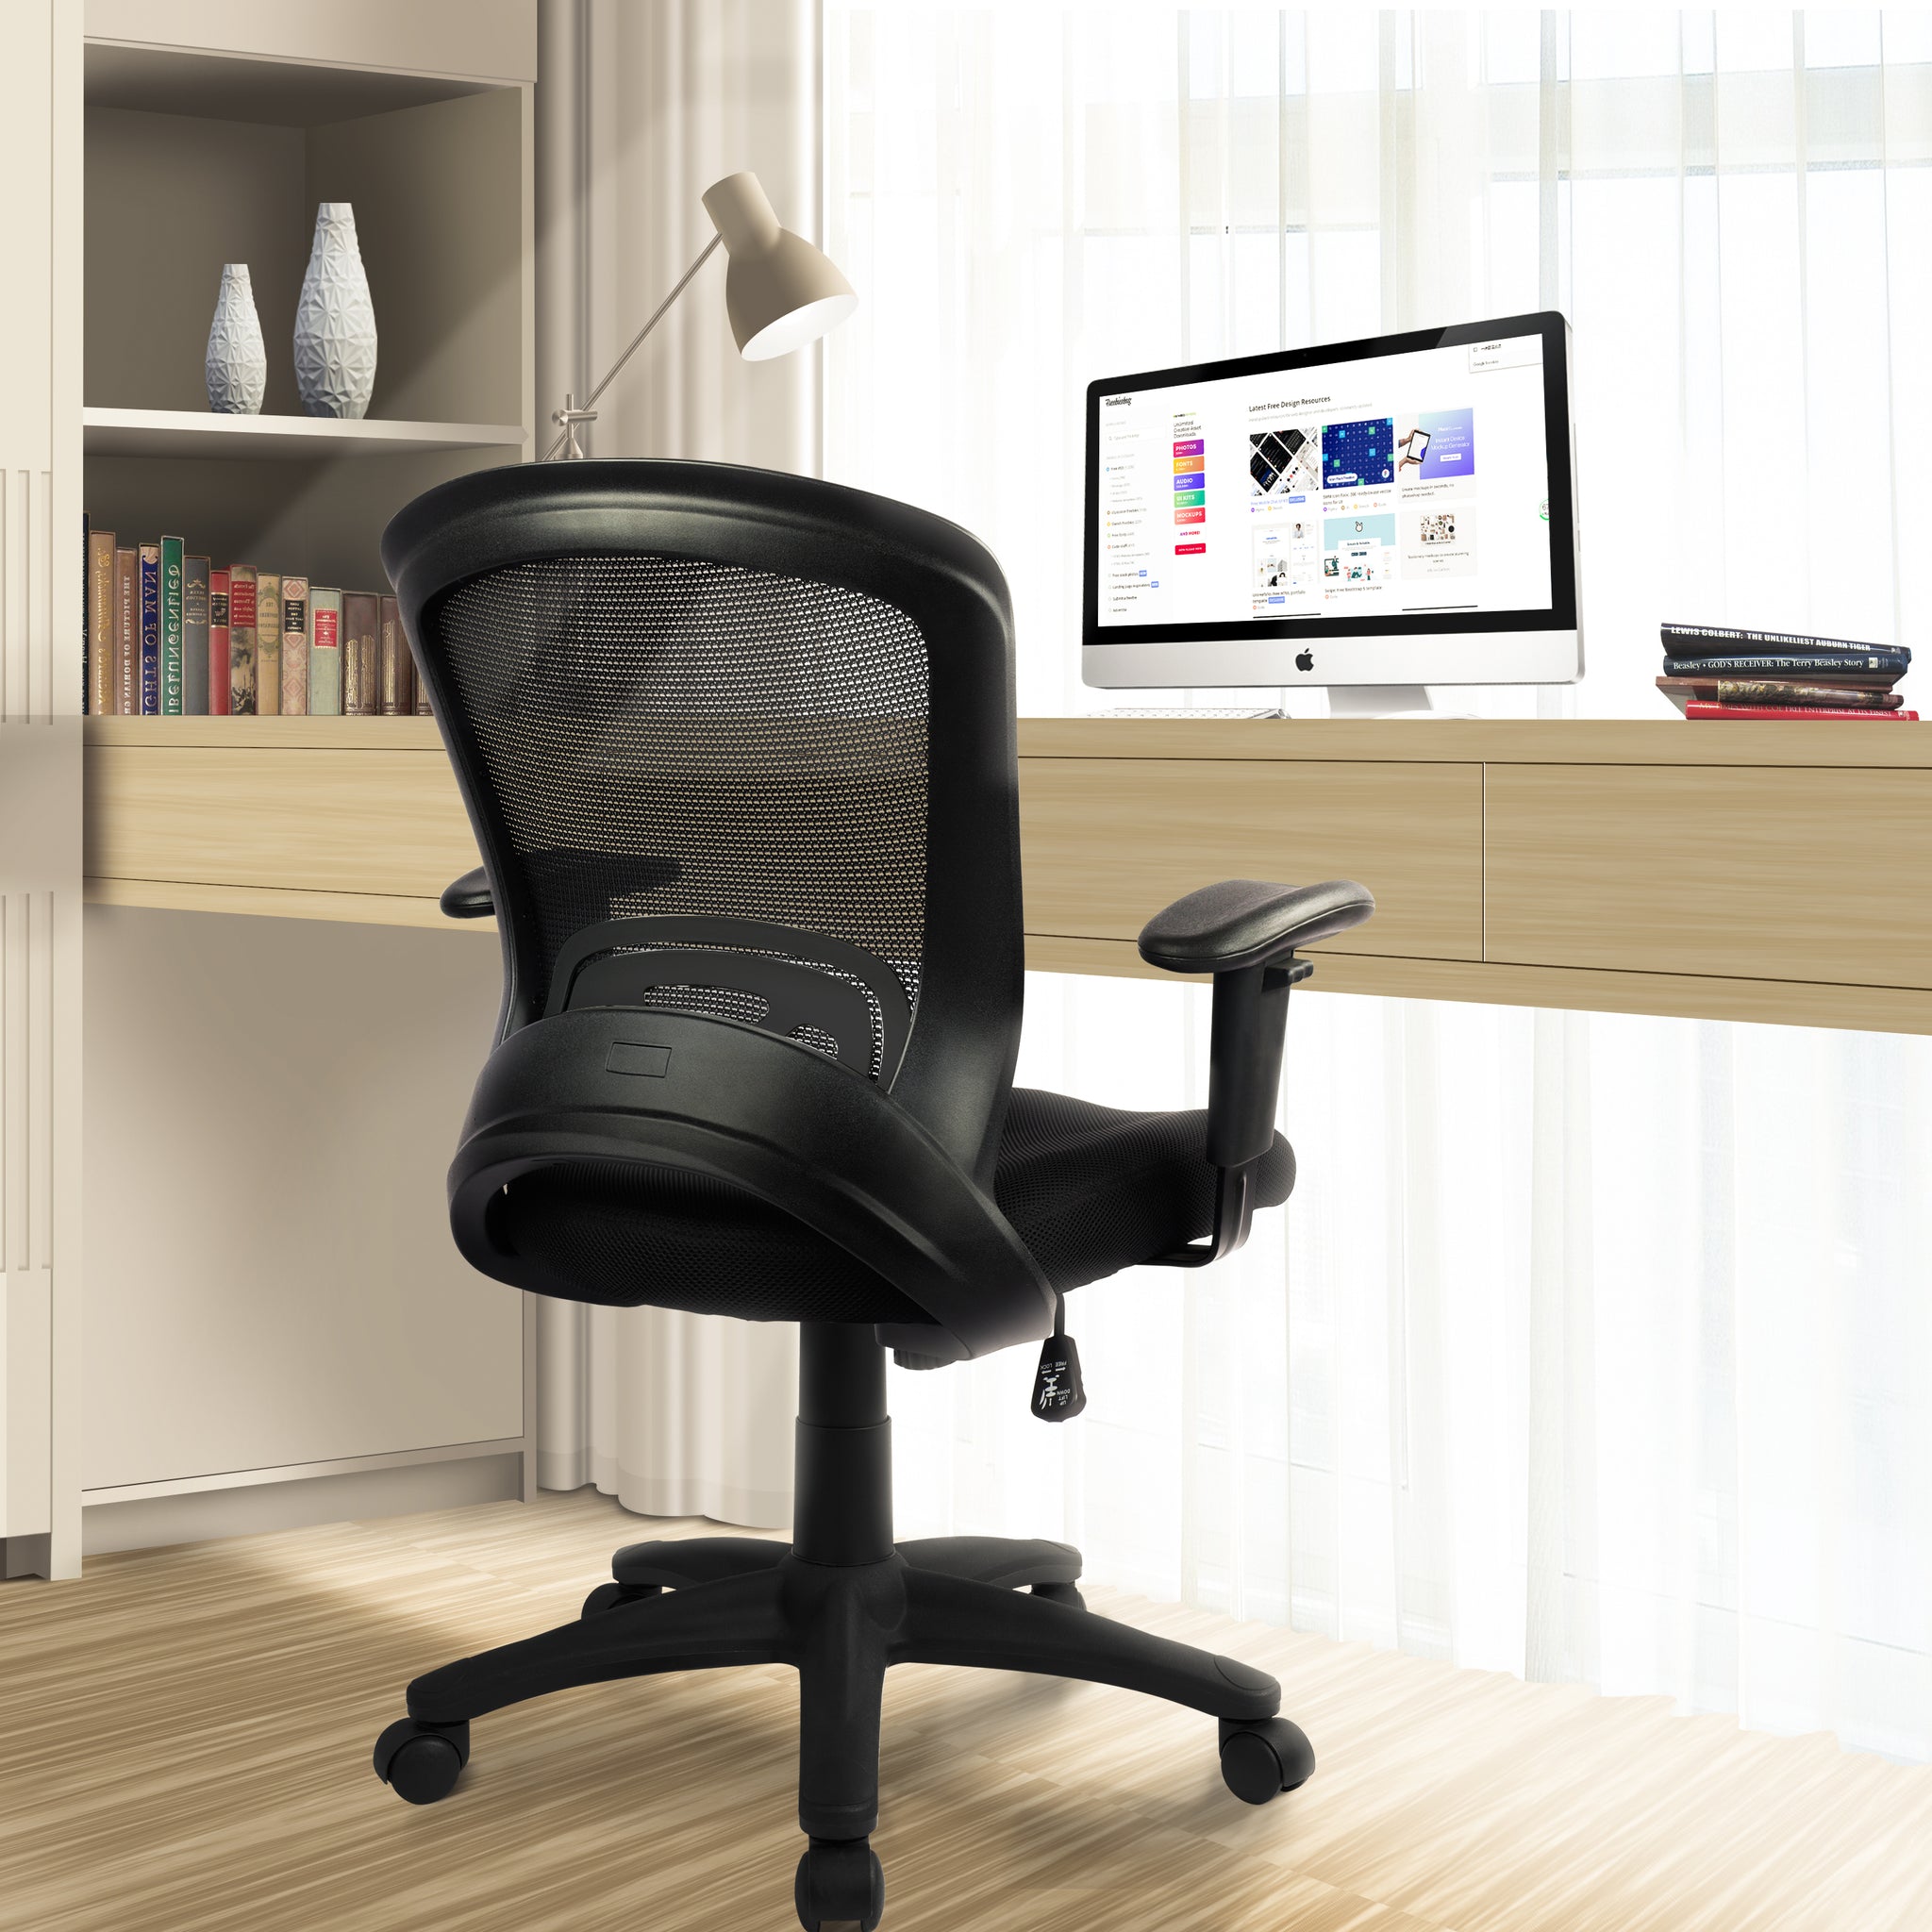 Ergonomic Mid Back Office Chair, Mesh Desk Computer Chair with